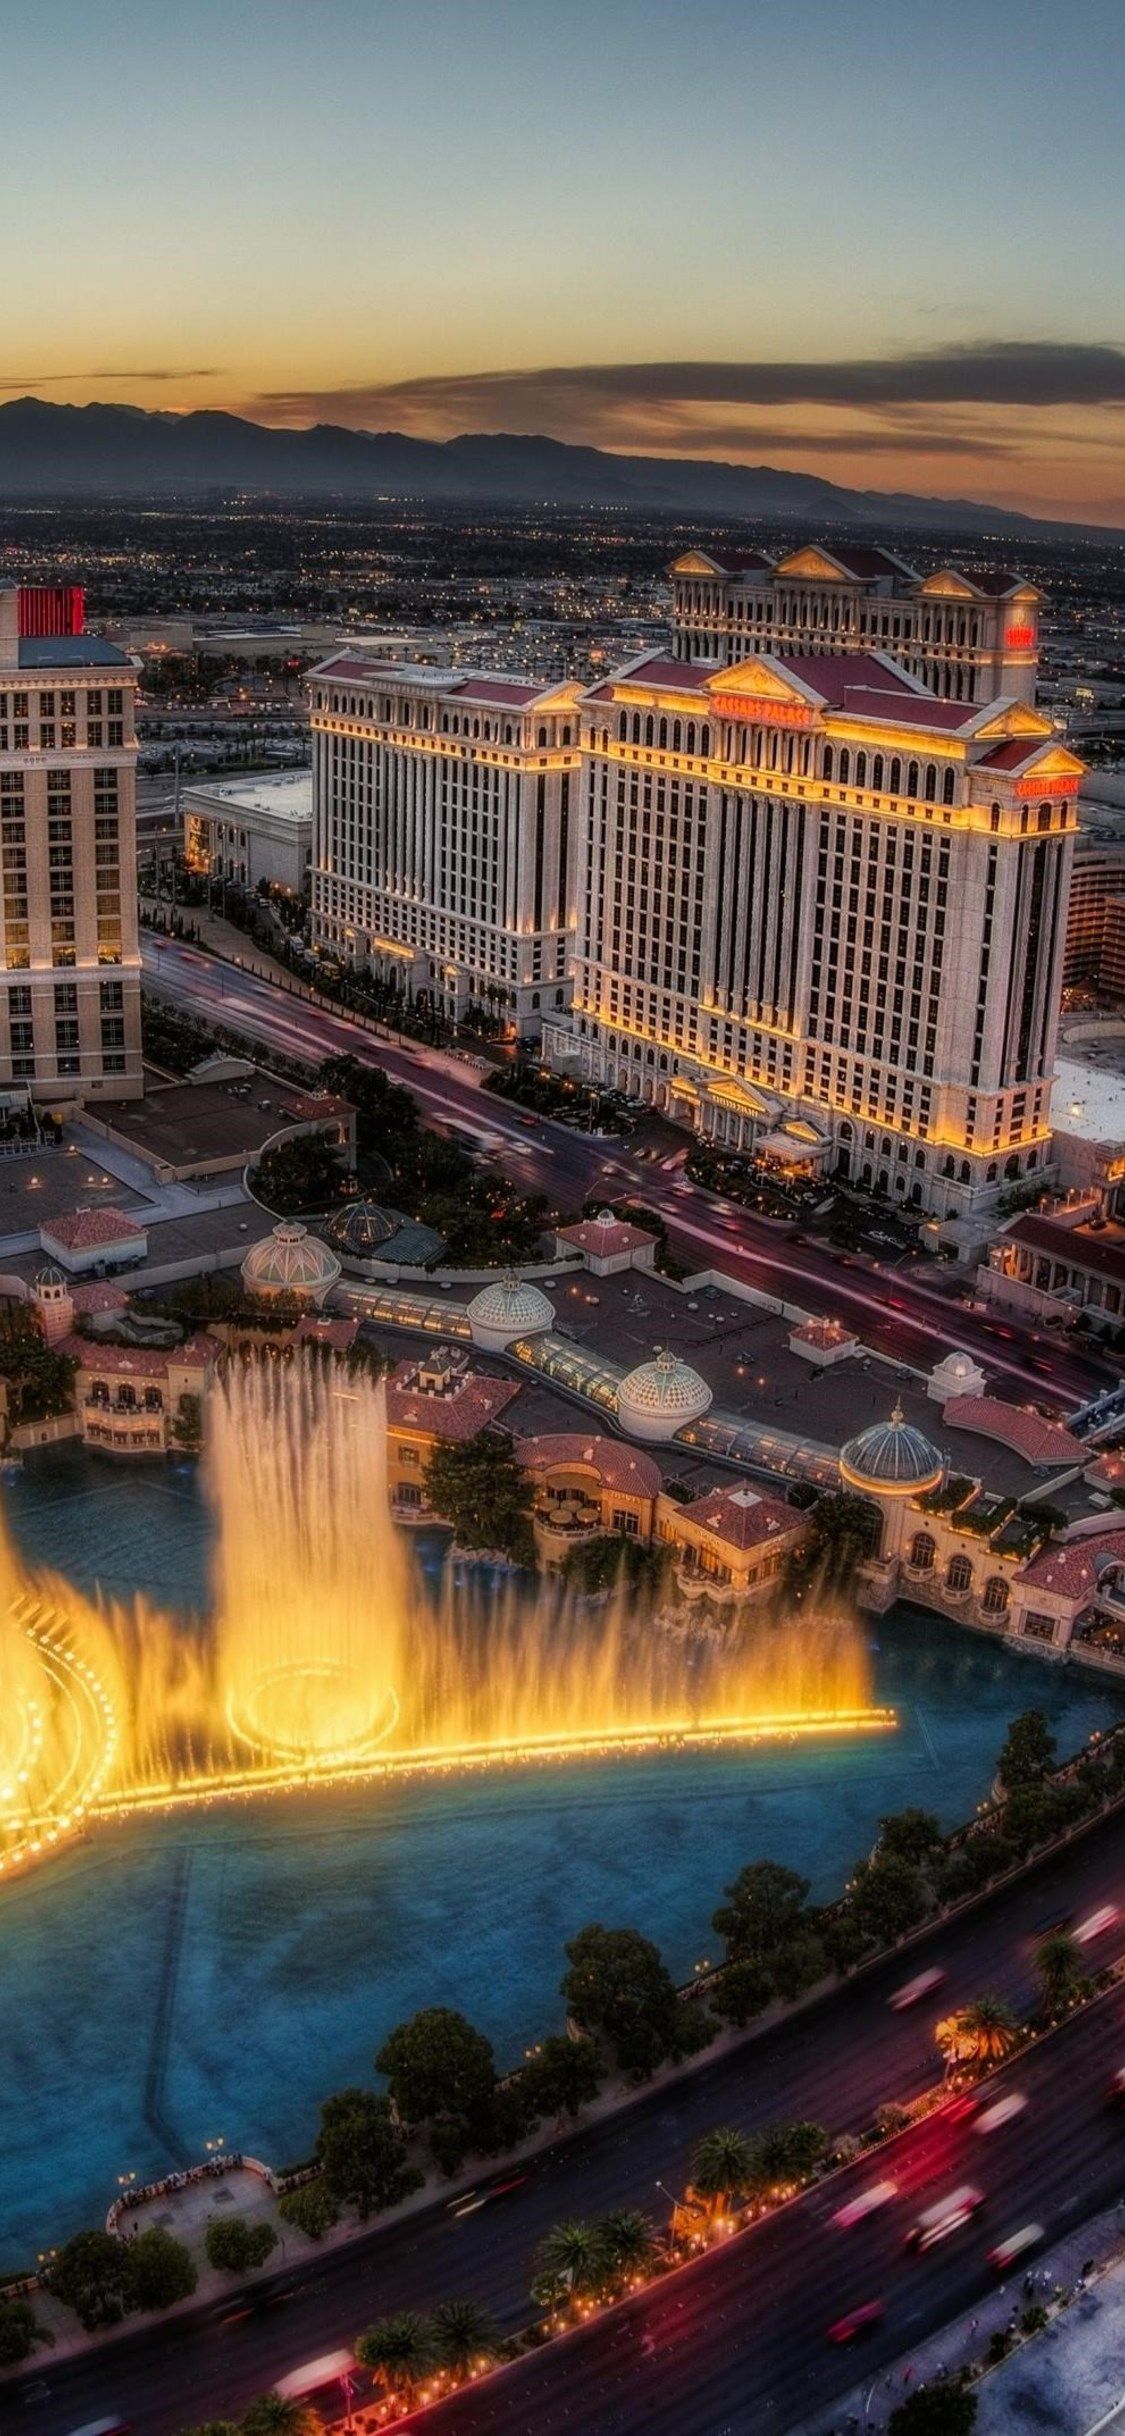 The fountains of bellagio are lit up at night - Las Vegas